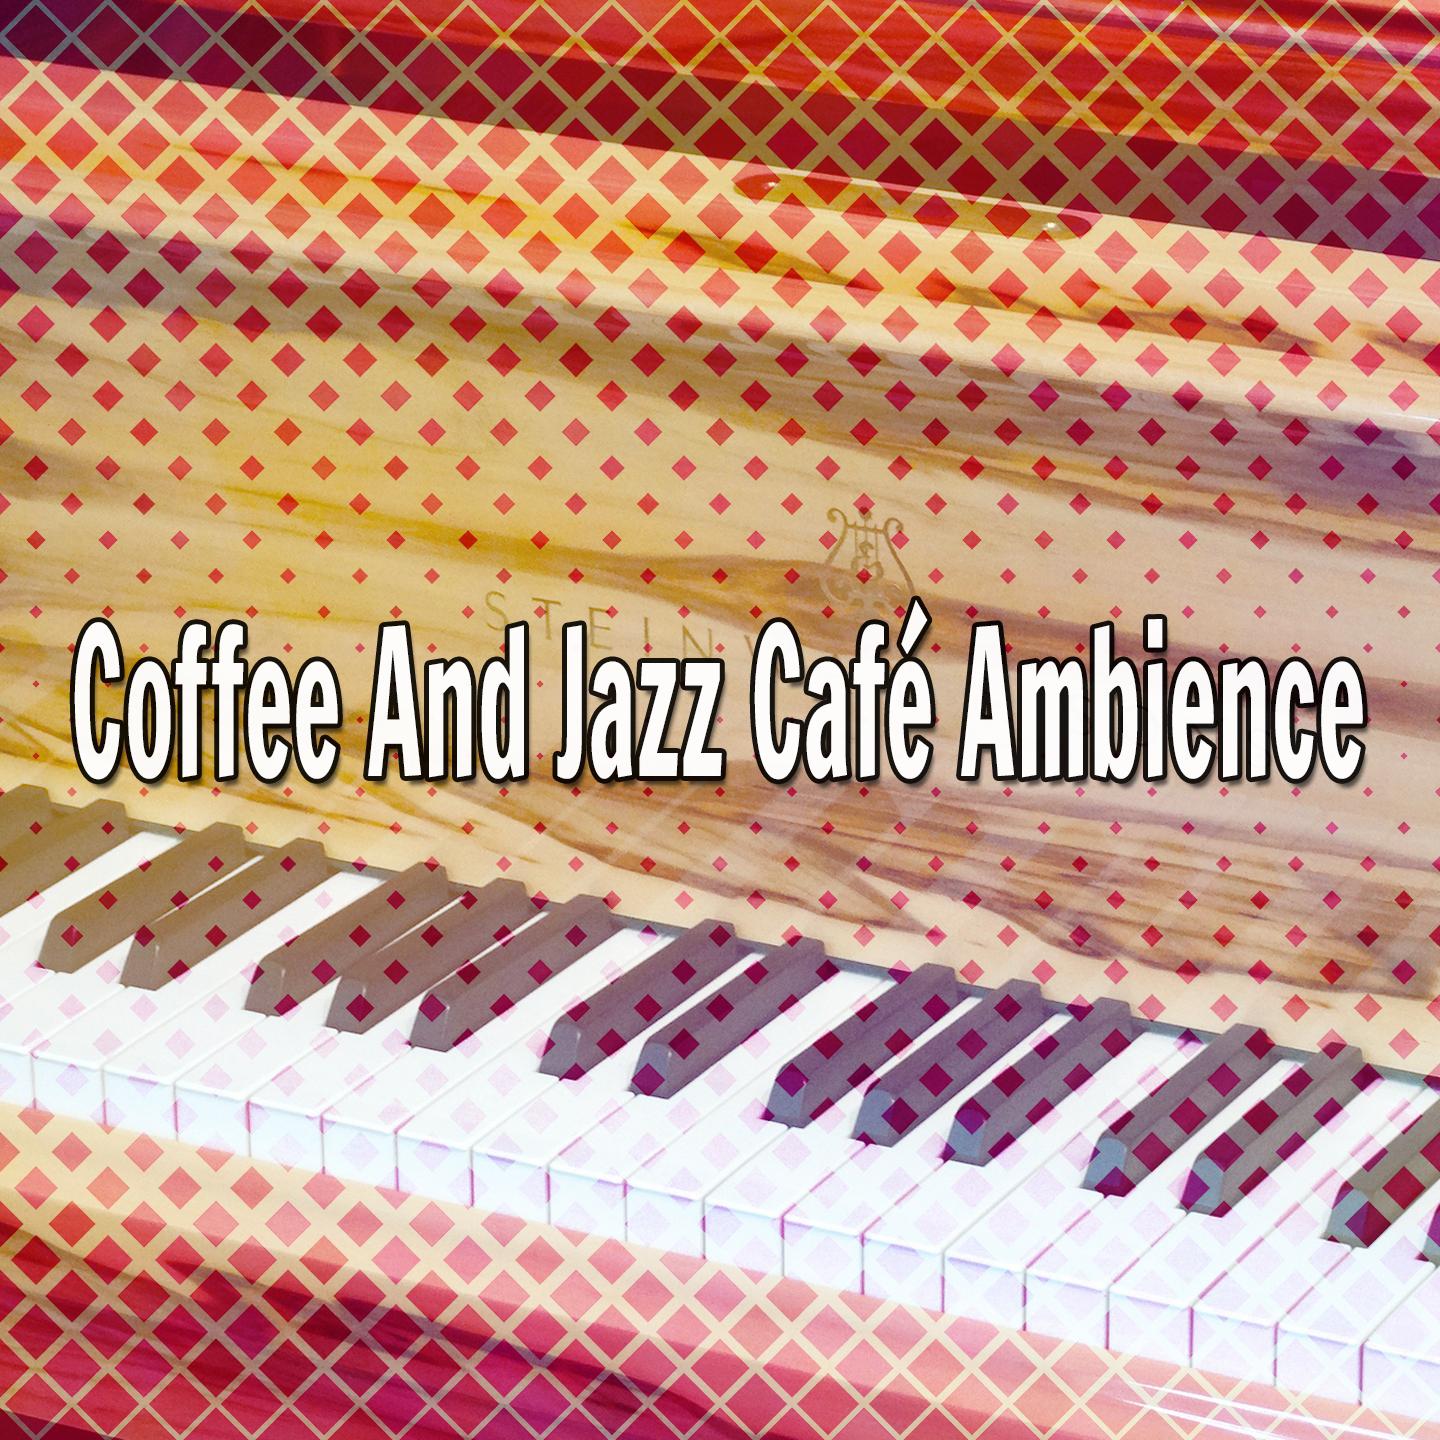 Coffee And Jazz Cafe Ambience